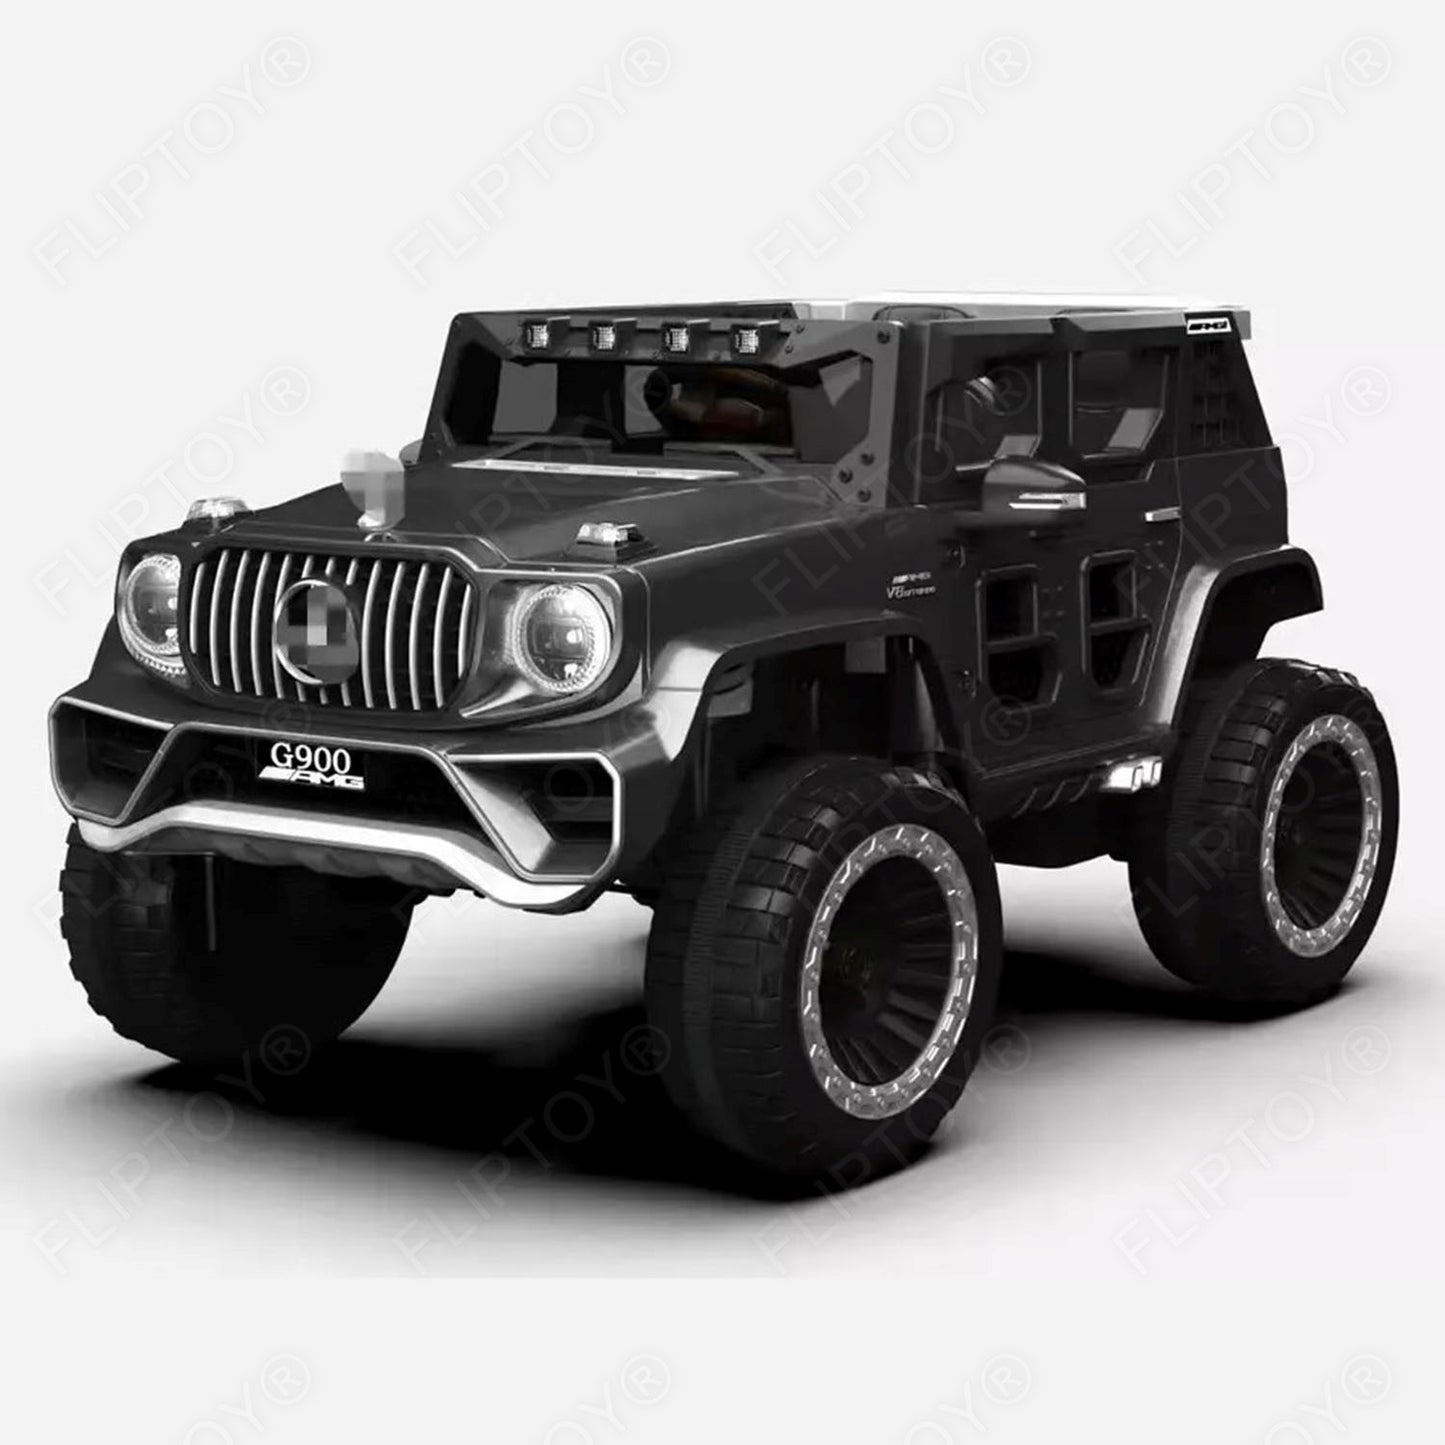 Fliptoy® | Kids ride on jeep | 4x4 | 2 seater | for age group 2-7 year | MP3 music player | Big jeep